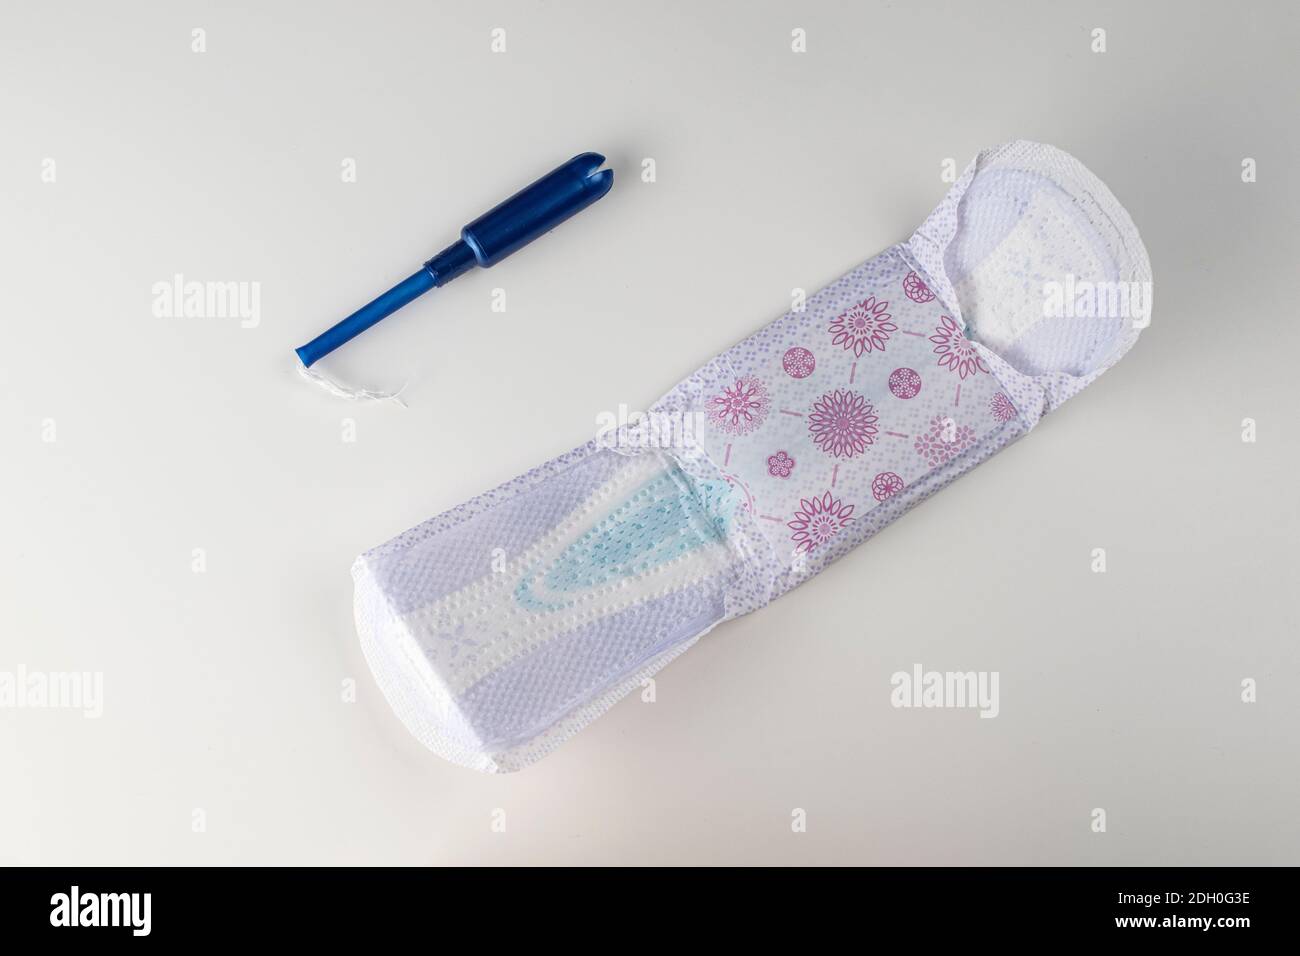 Choice between a tampon and a sanitary towel as a period product Stock Photo